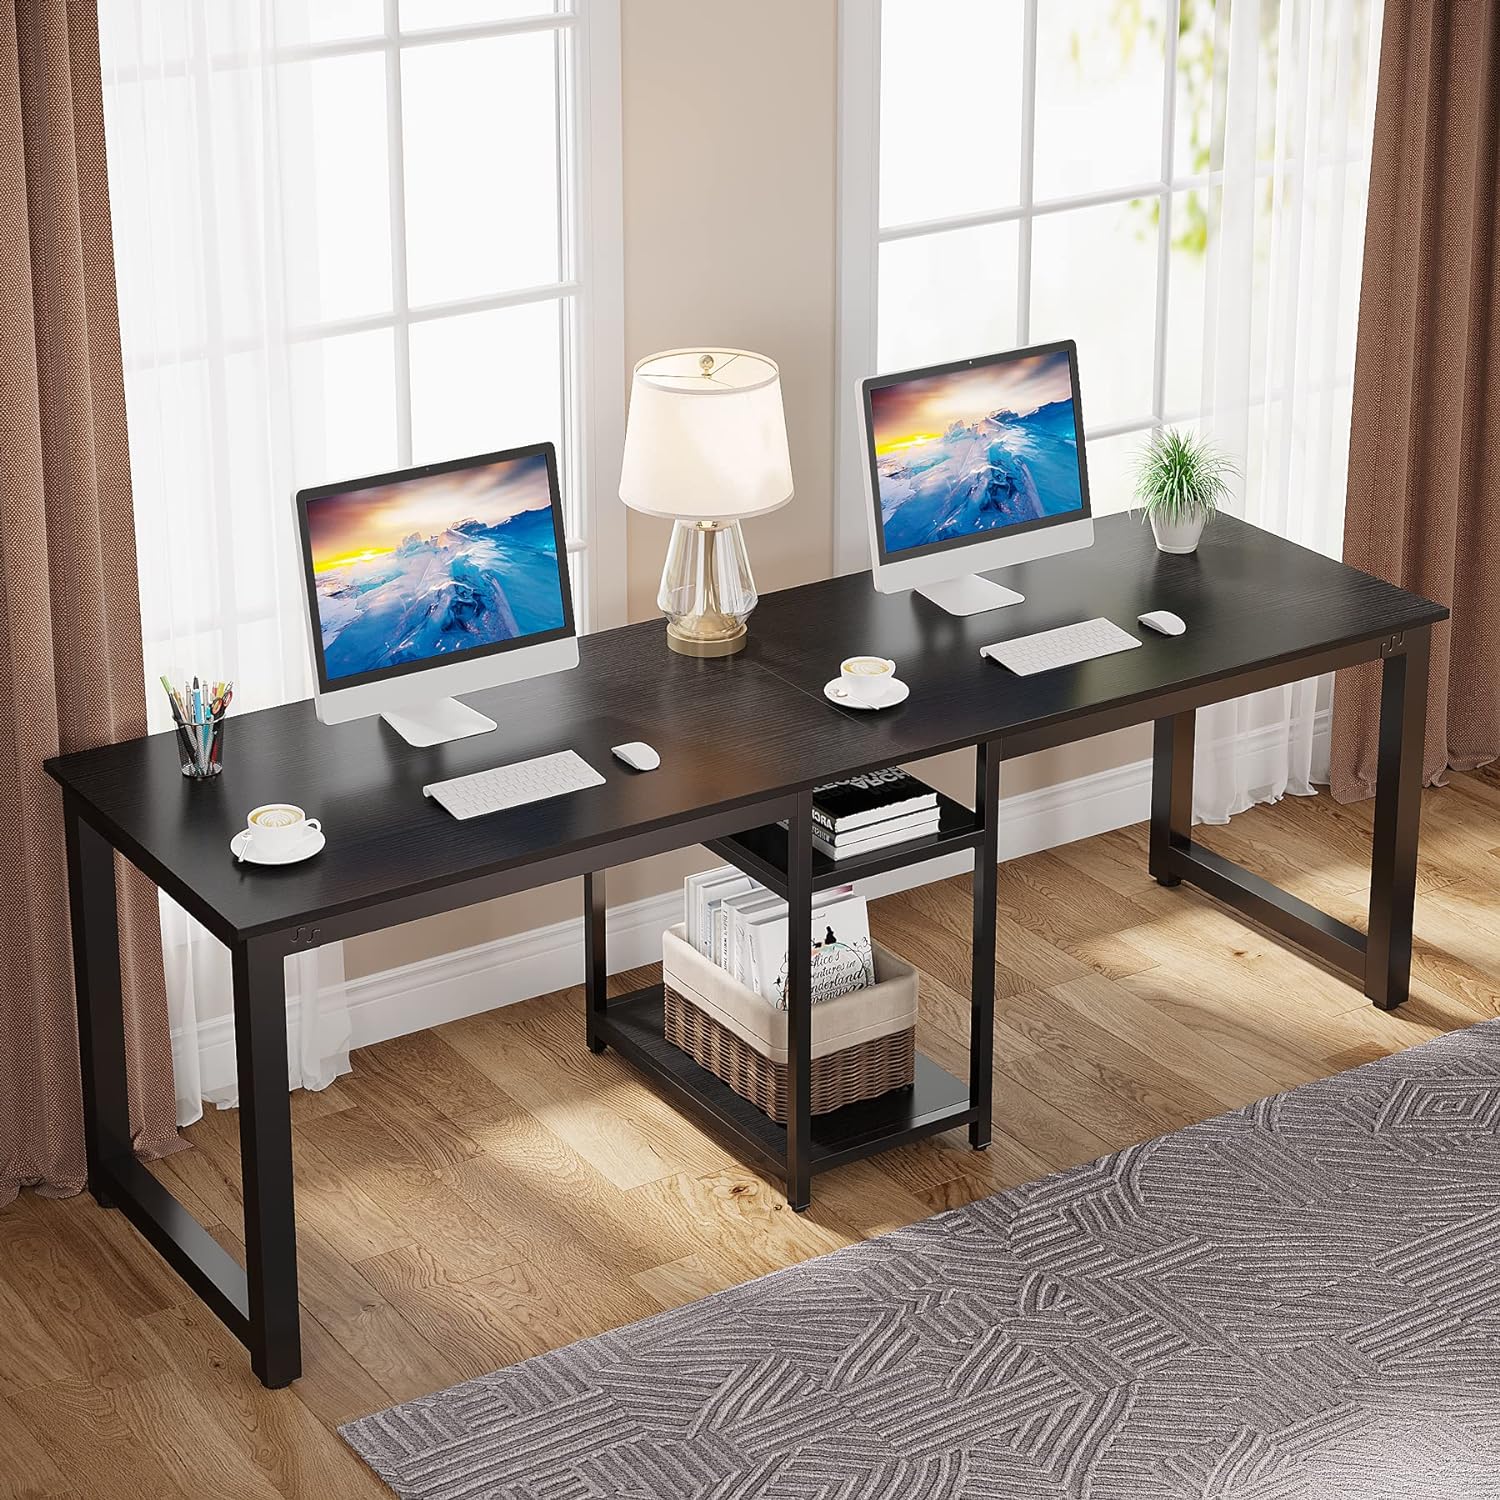 Tribesigns 78 Inches Computer Desk, Extra Large Two Person Office Desk with Shelf, Double Workstation Desk for Home Office(Black)